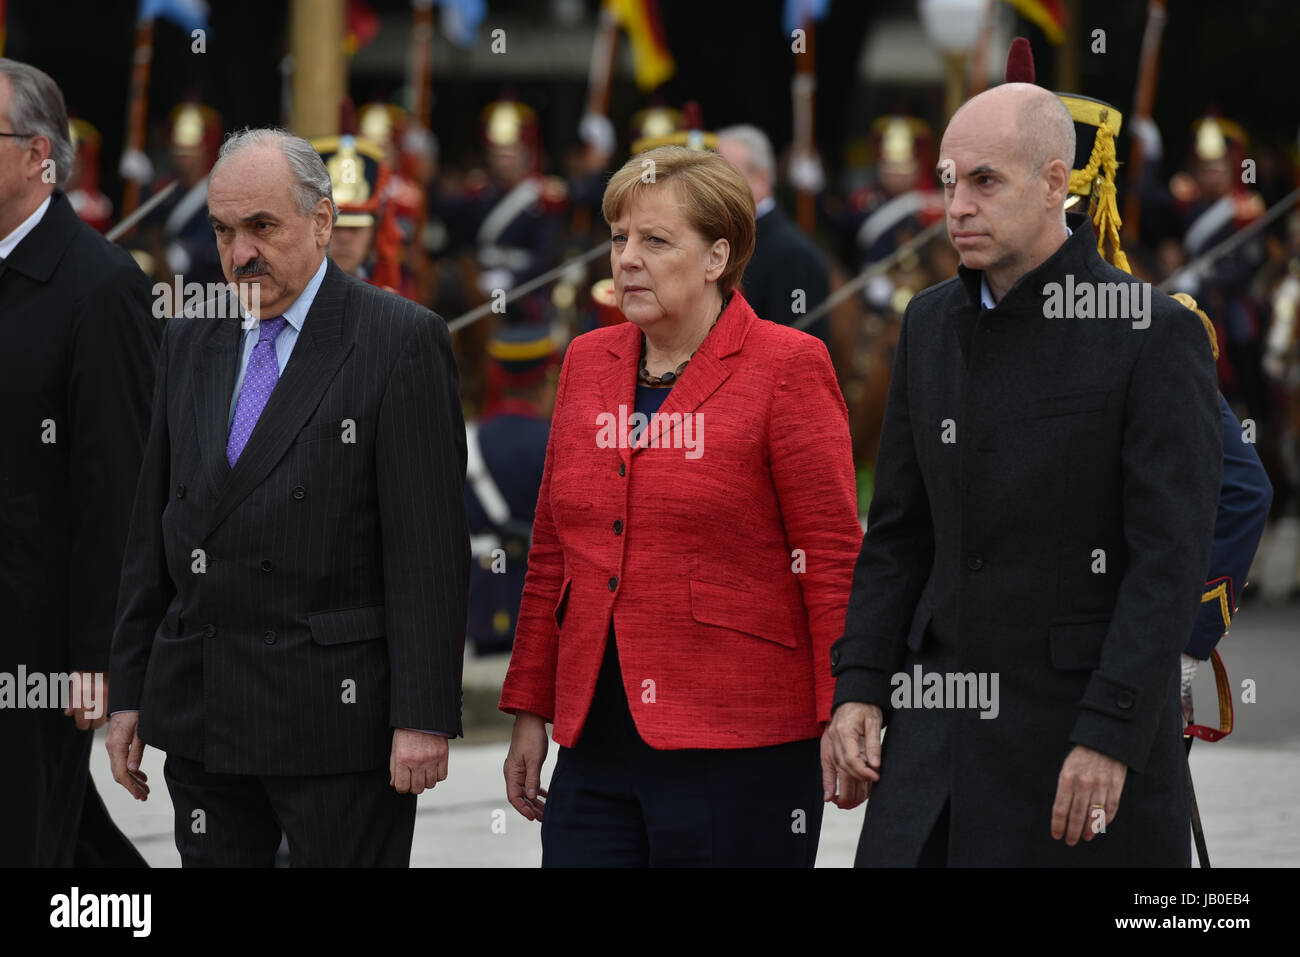 Buenos Aires, Argentina. 8th June, 2017. Chancellor of Germany Angela Merkel (C), the Mayor of Buenos Aires Horacio Rodriguez Larreta (R) and the Vice Minister of foreign affairs Pedro Villagra Delgado (L) during a wreath-laying ceremony at the Plaza San Martin square in Buenos Aires, Argentina. Credit: Anton Velikzhanin/Alamy Live News Stock Photo